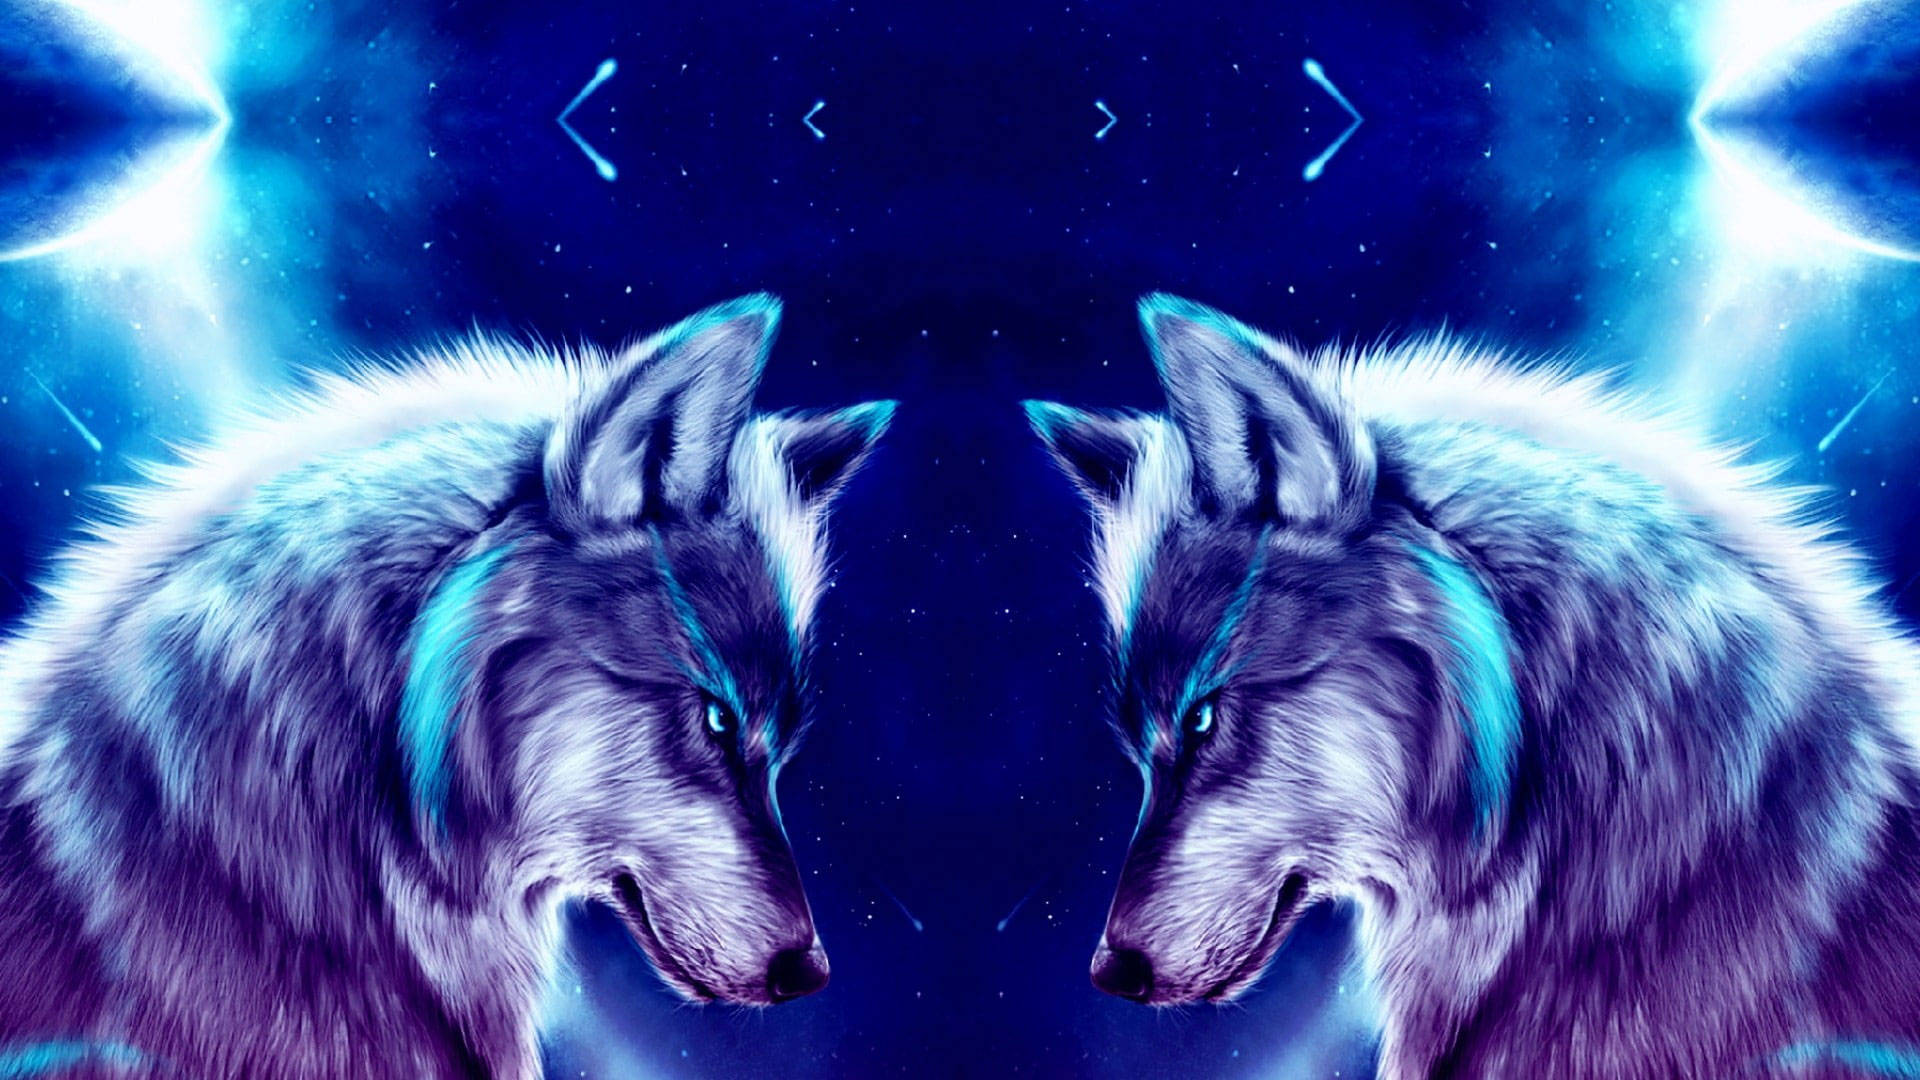 Cool Galaxy Wolf - Two Wolves Gazing at the Stars Wallpaper